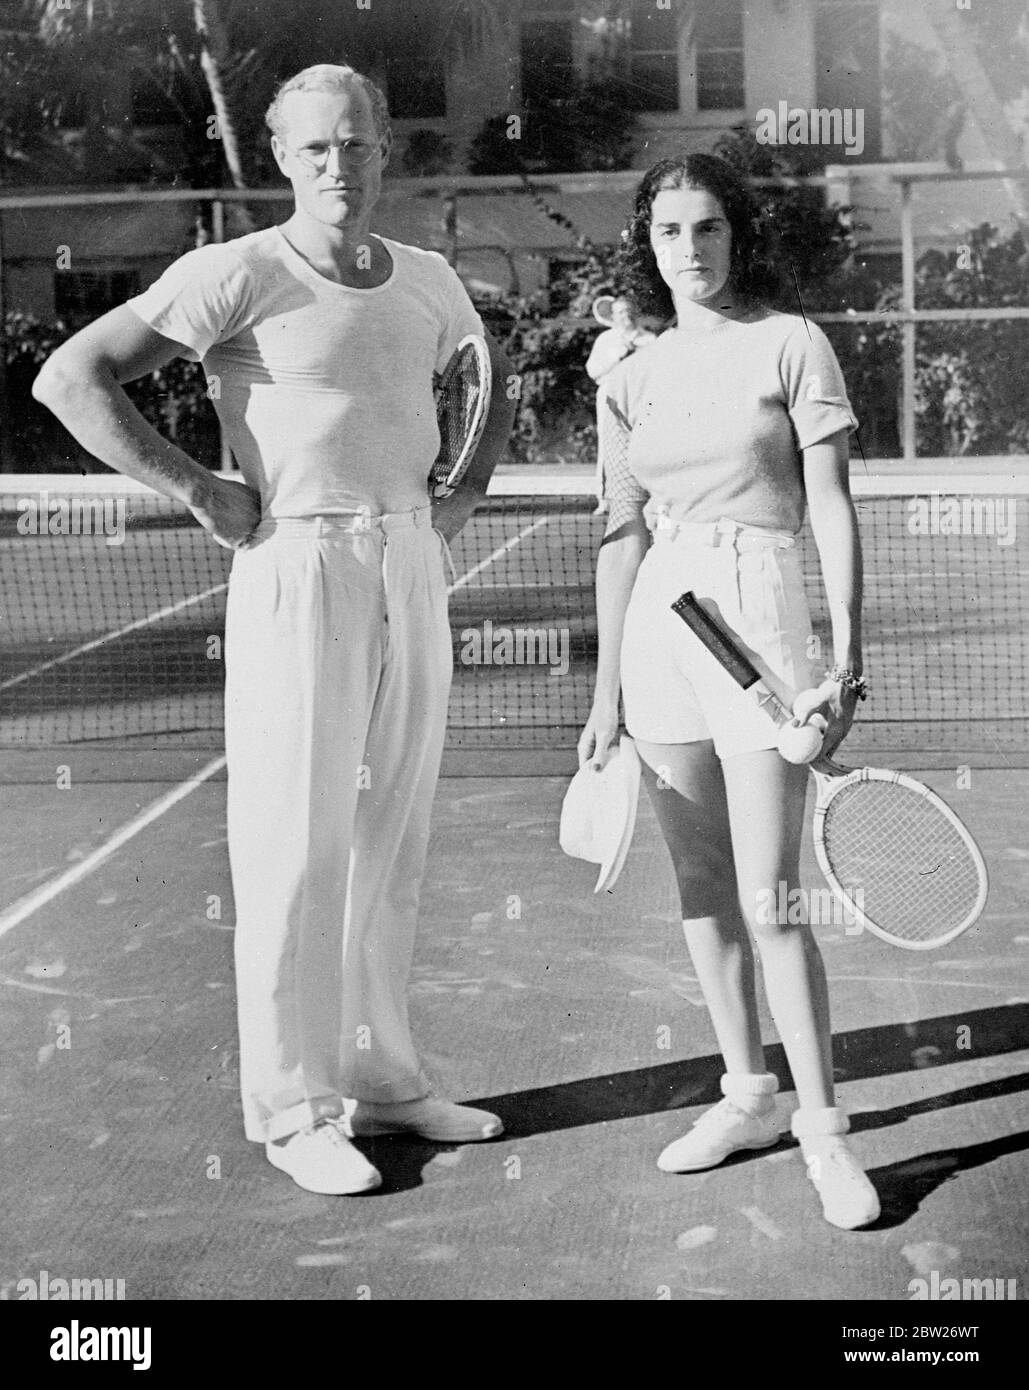 Son of General Pershing engaged, father critically ill. Mr Francis Warren Pershing, the son of General Pershing, has become engaged to Miss Muriel P Richards, granddaughter of Jules Bache, seen here on the tennis court, at Palm Beach, Florida. 26 February 26 1938 Stock Photo